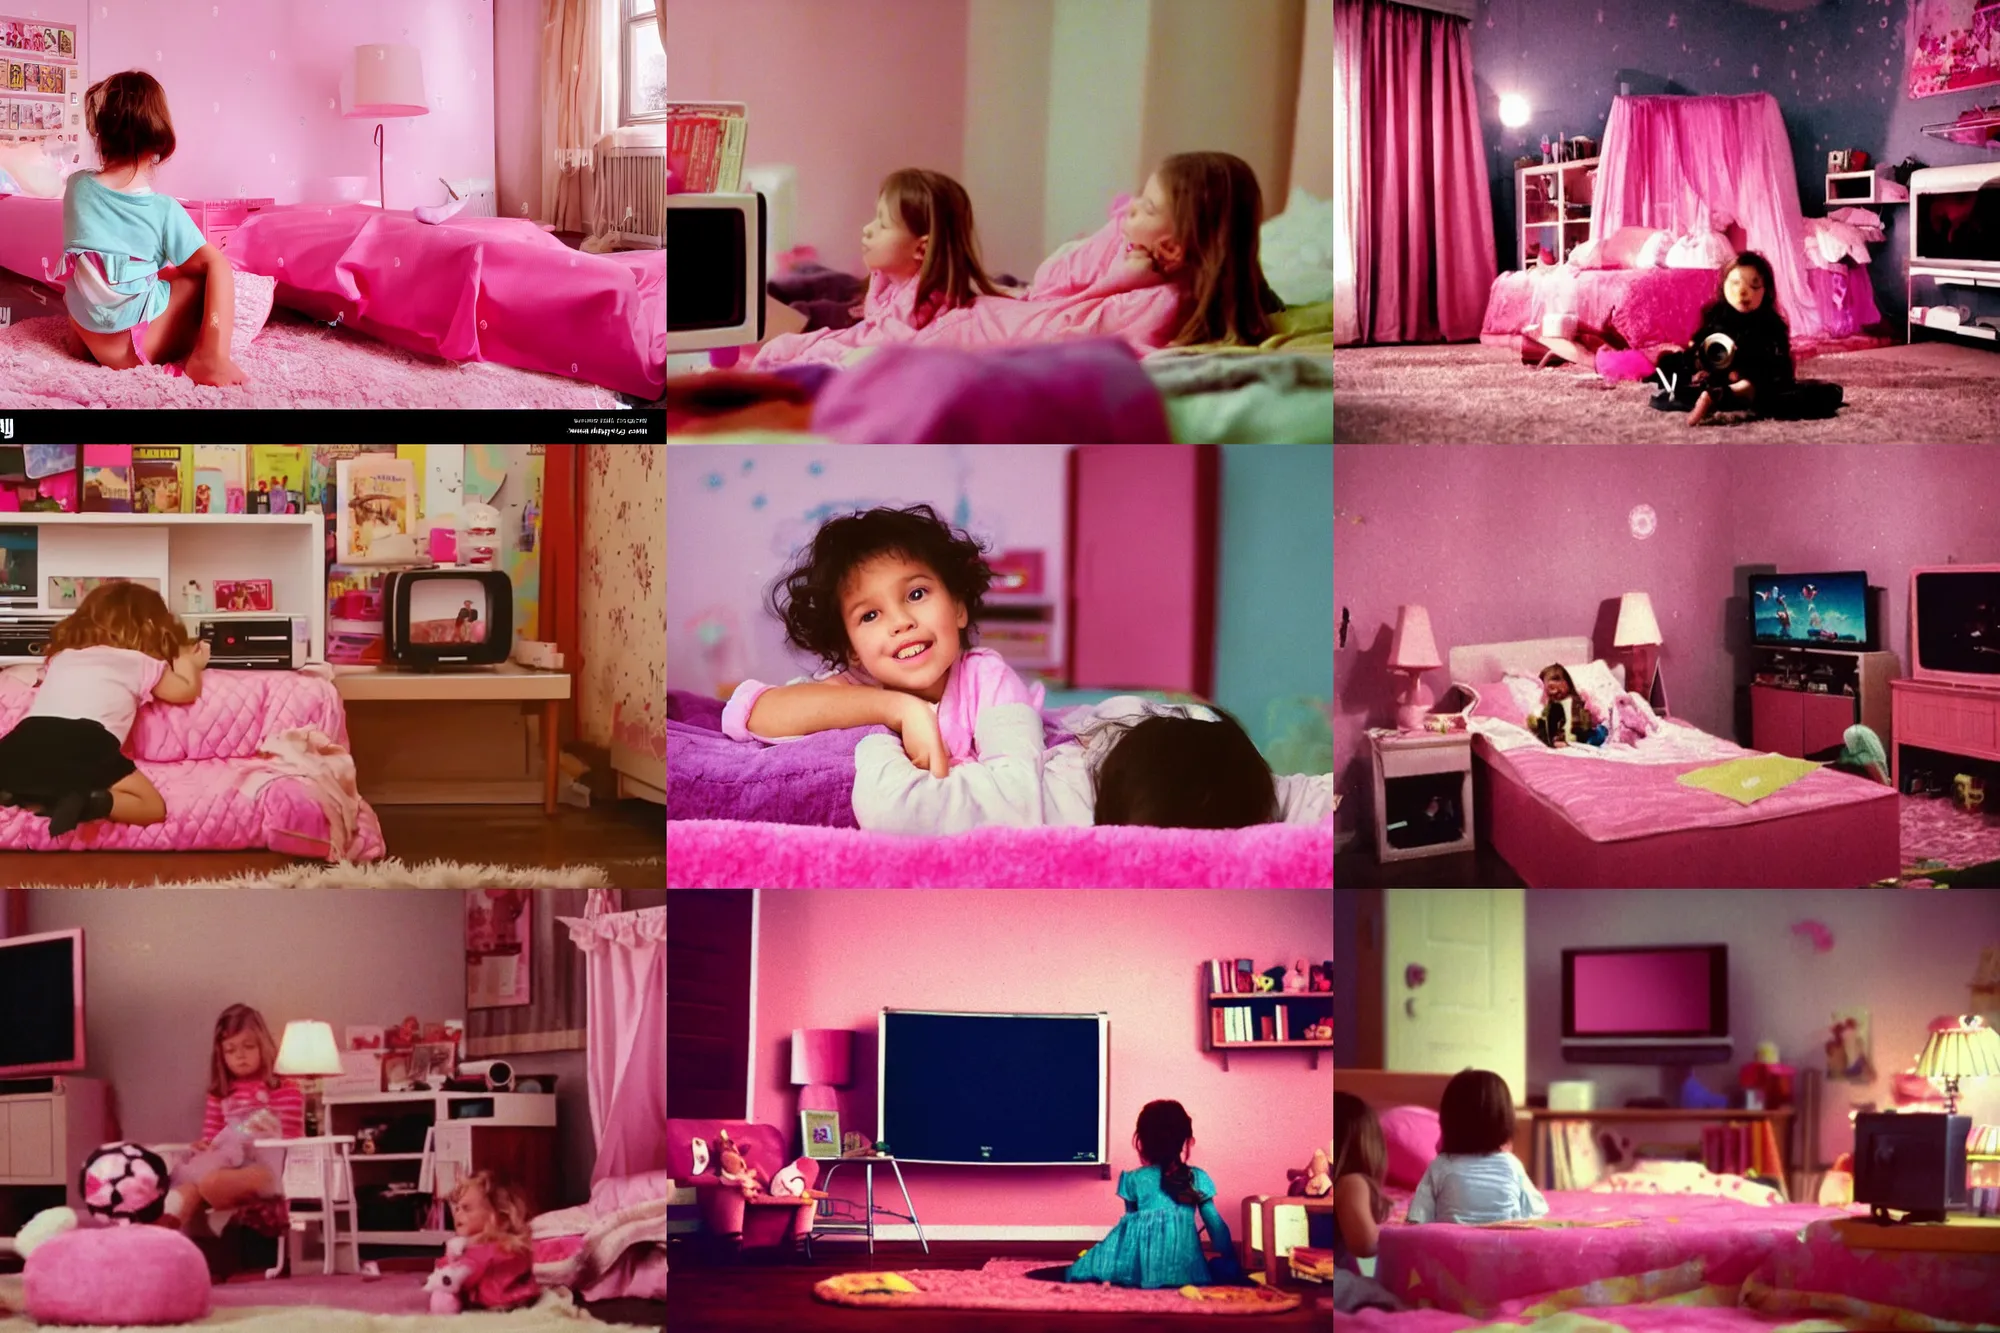 Prompt: Home video footage. A little girl is watching TV in her room at night. The girl is on her pink bed. Color VHS picture quality with mixed noise.